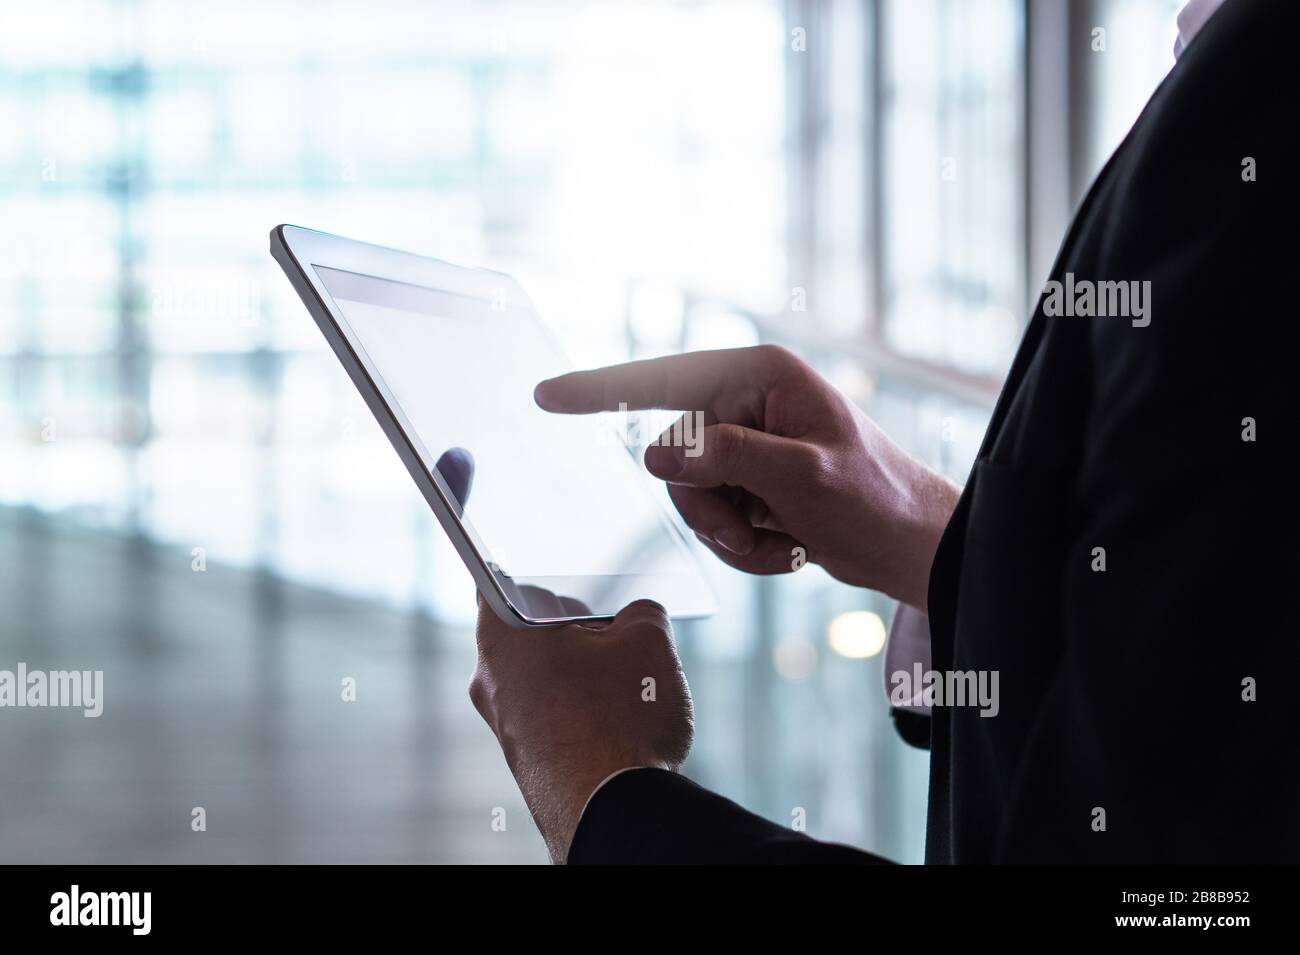 Man in a suit using tablet. Businessman with smart mobile device in modern glass building. Stock Photo